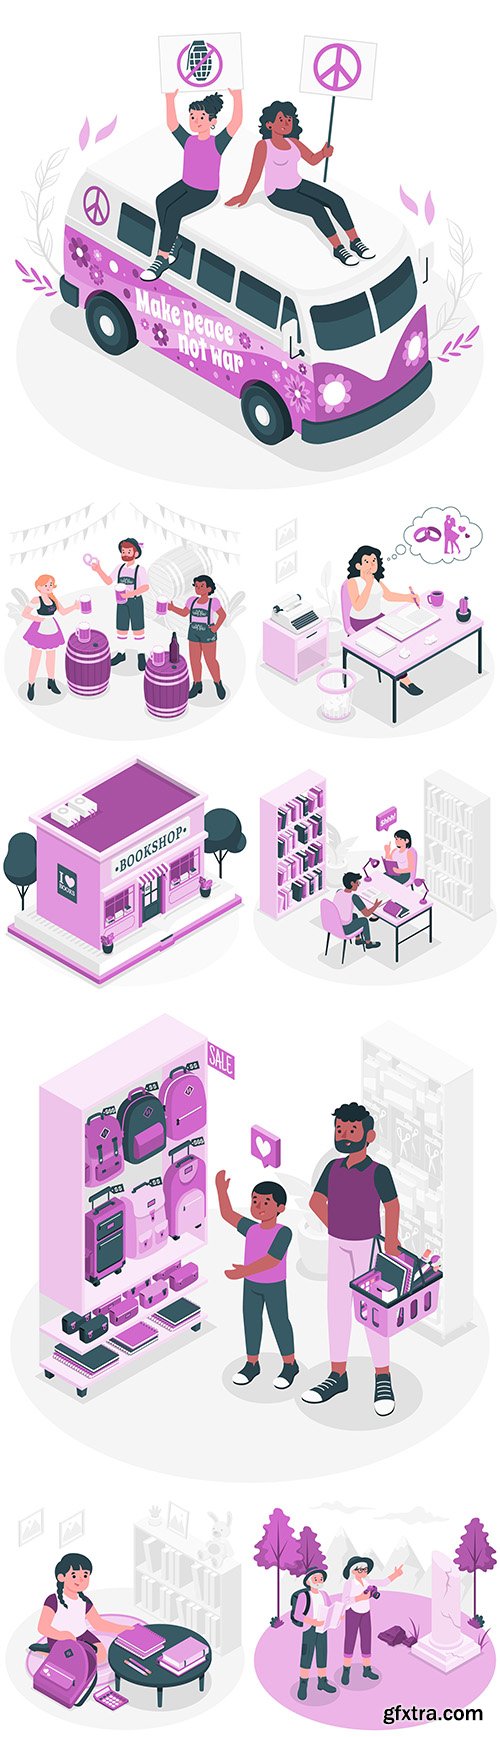 Lifestyle people in different professions illustrations isometric